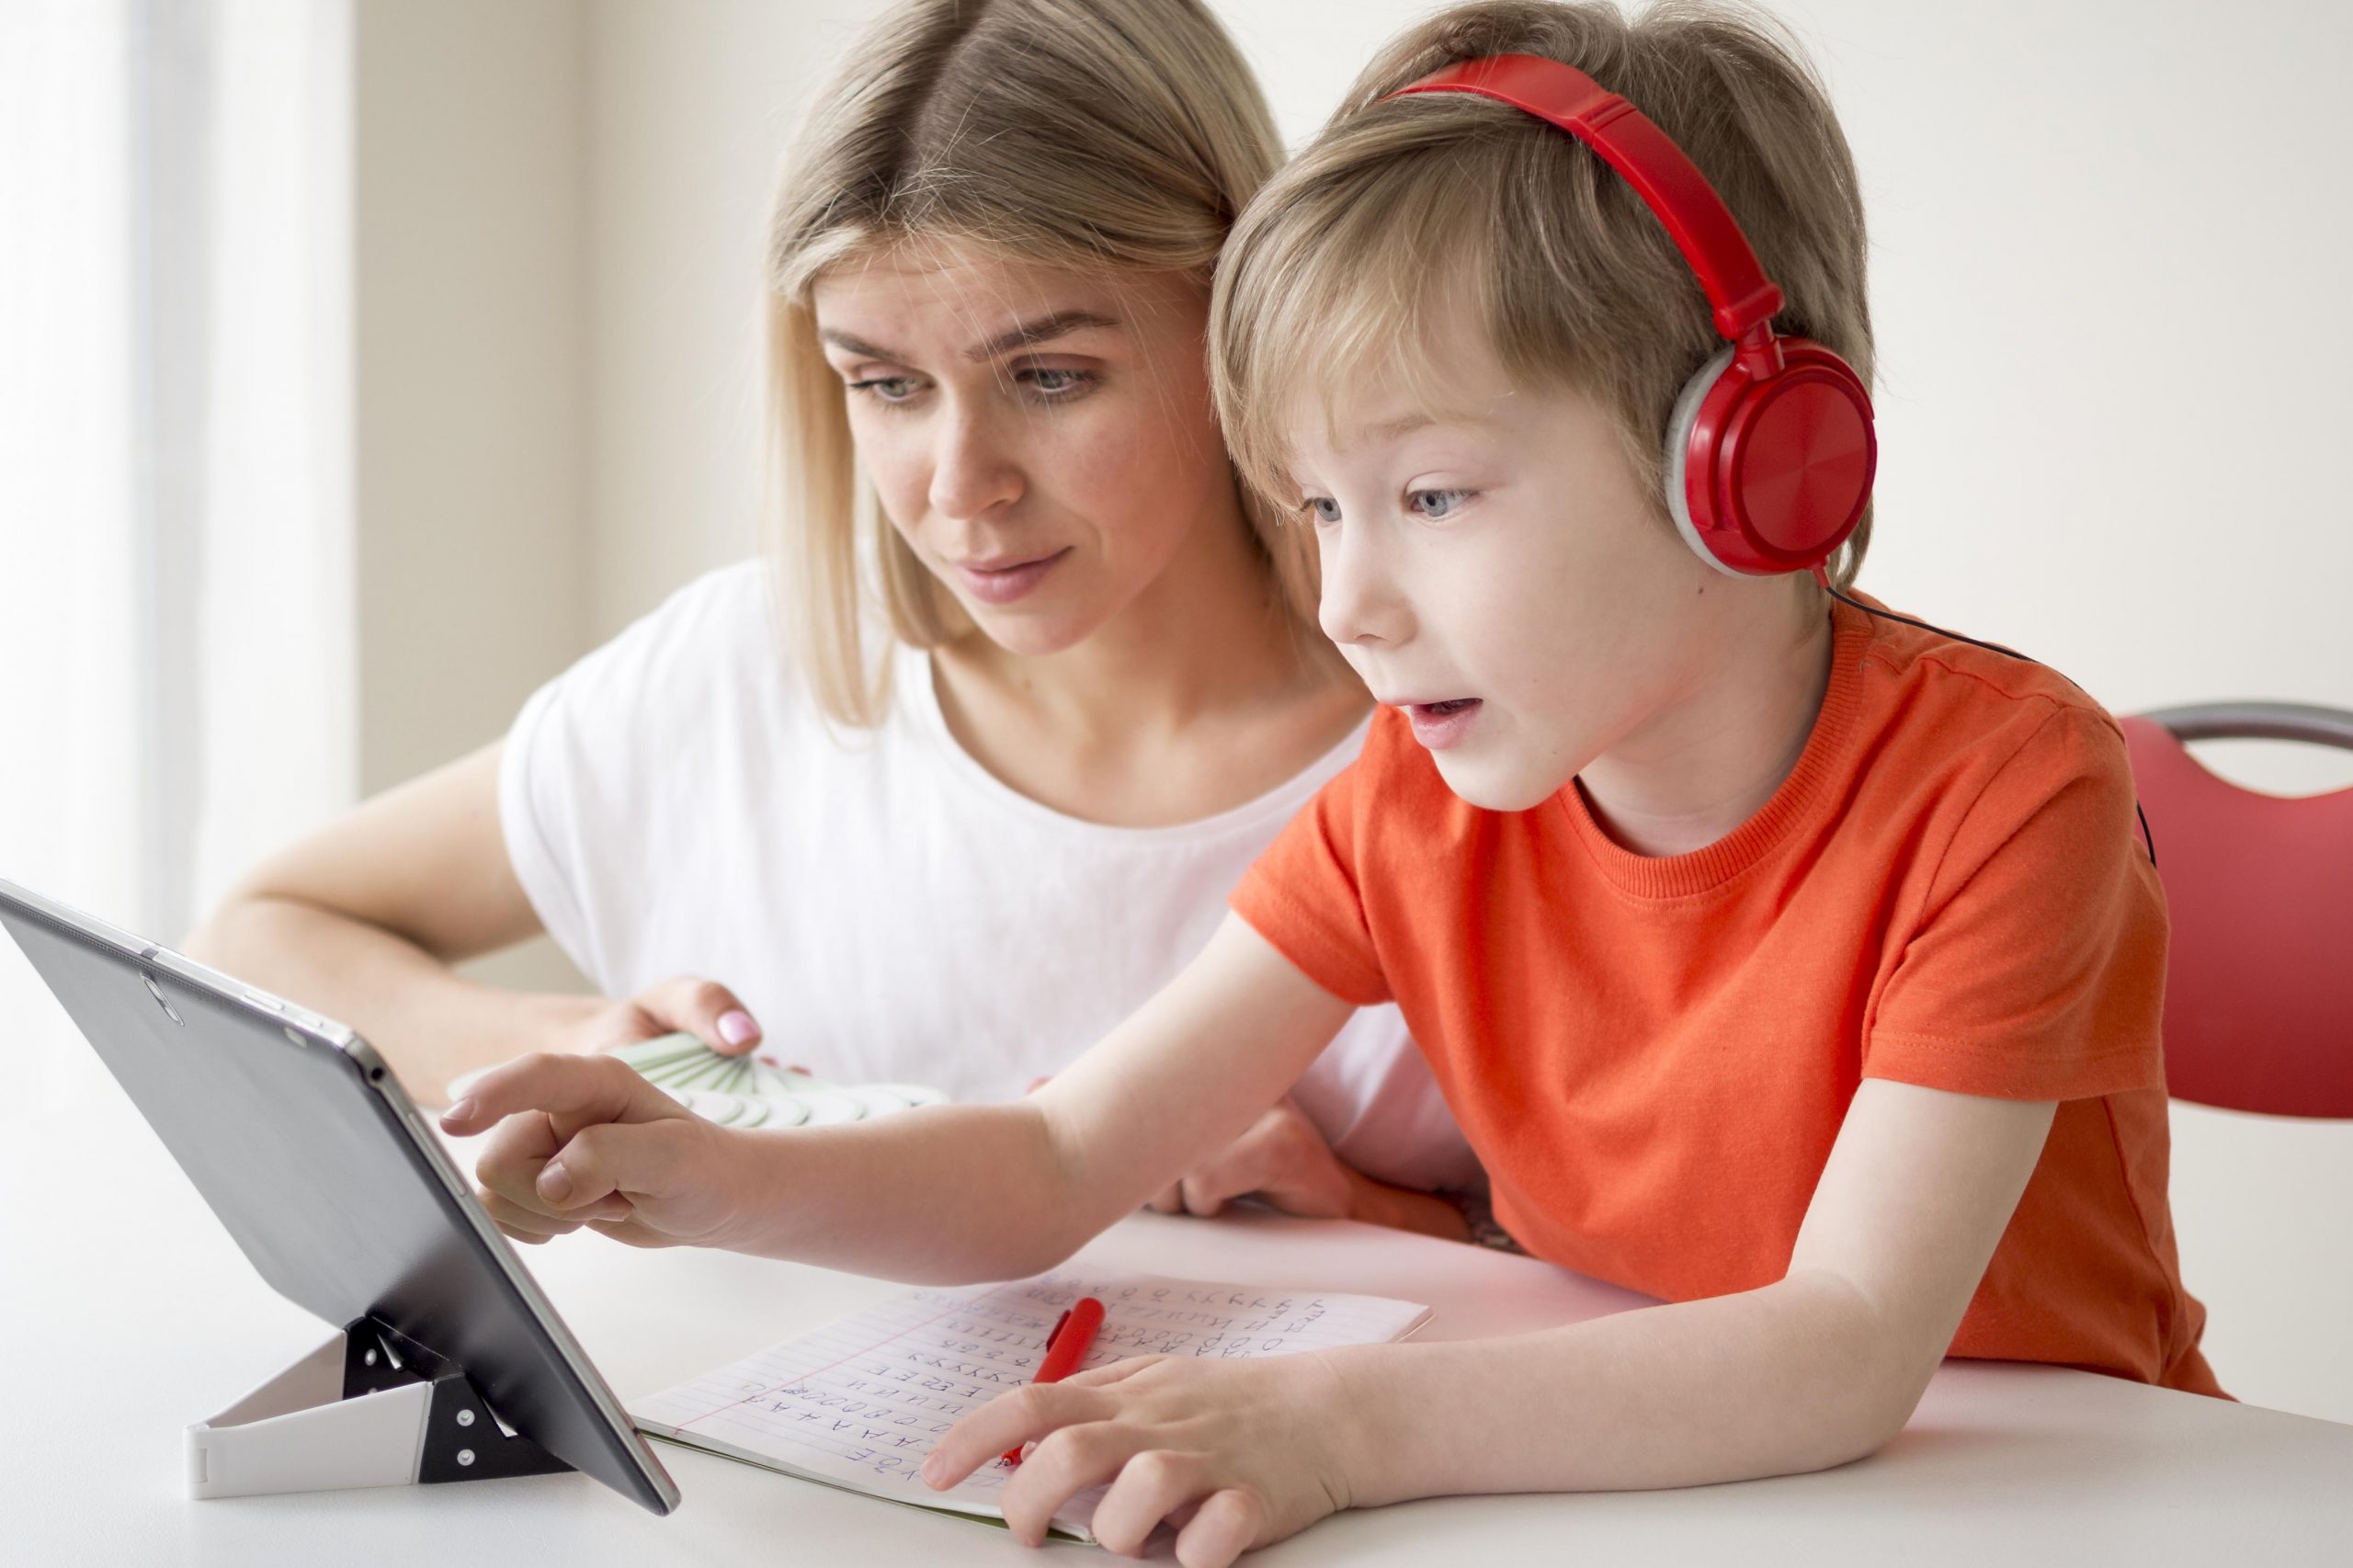 5 Different Resources to Help Kids Learn to Code